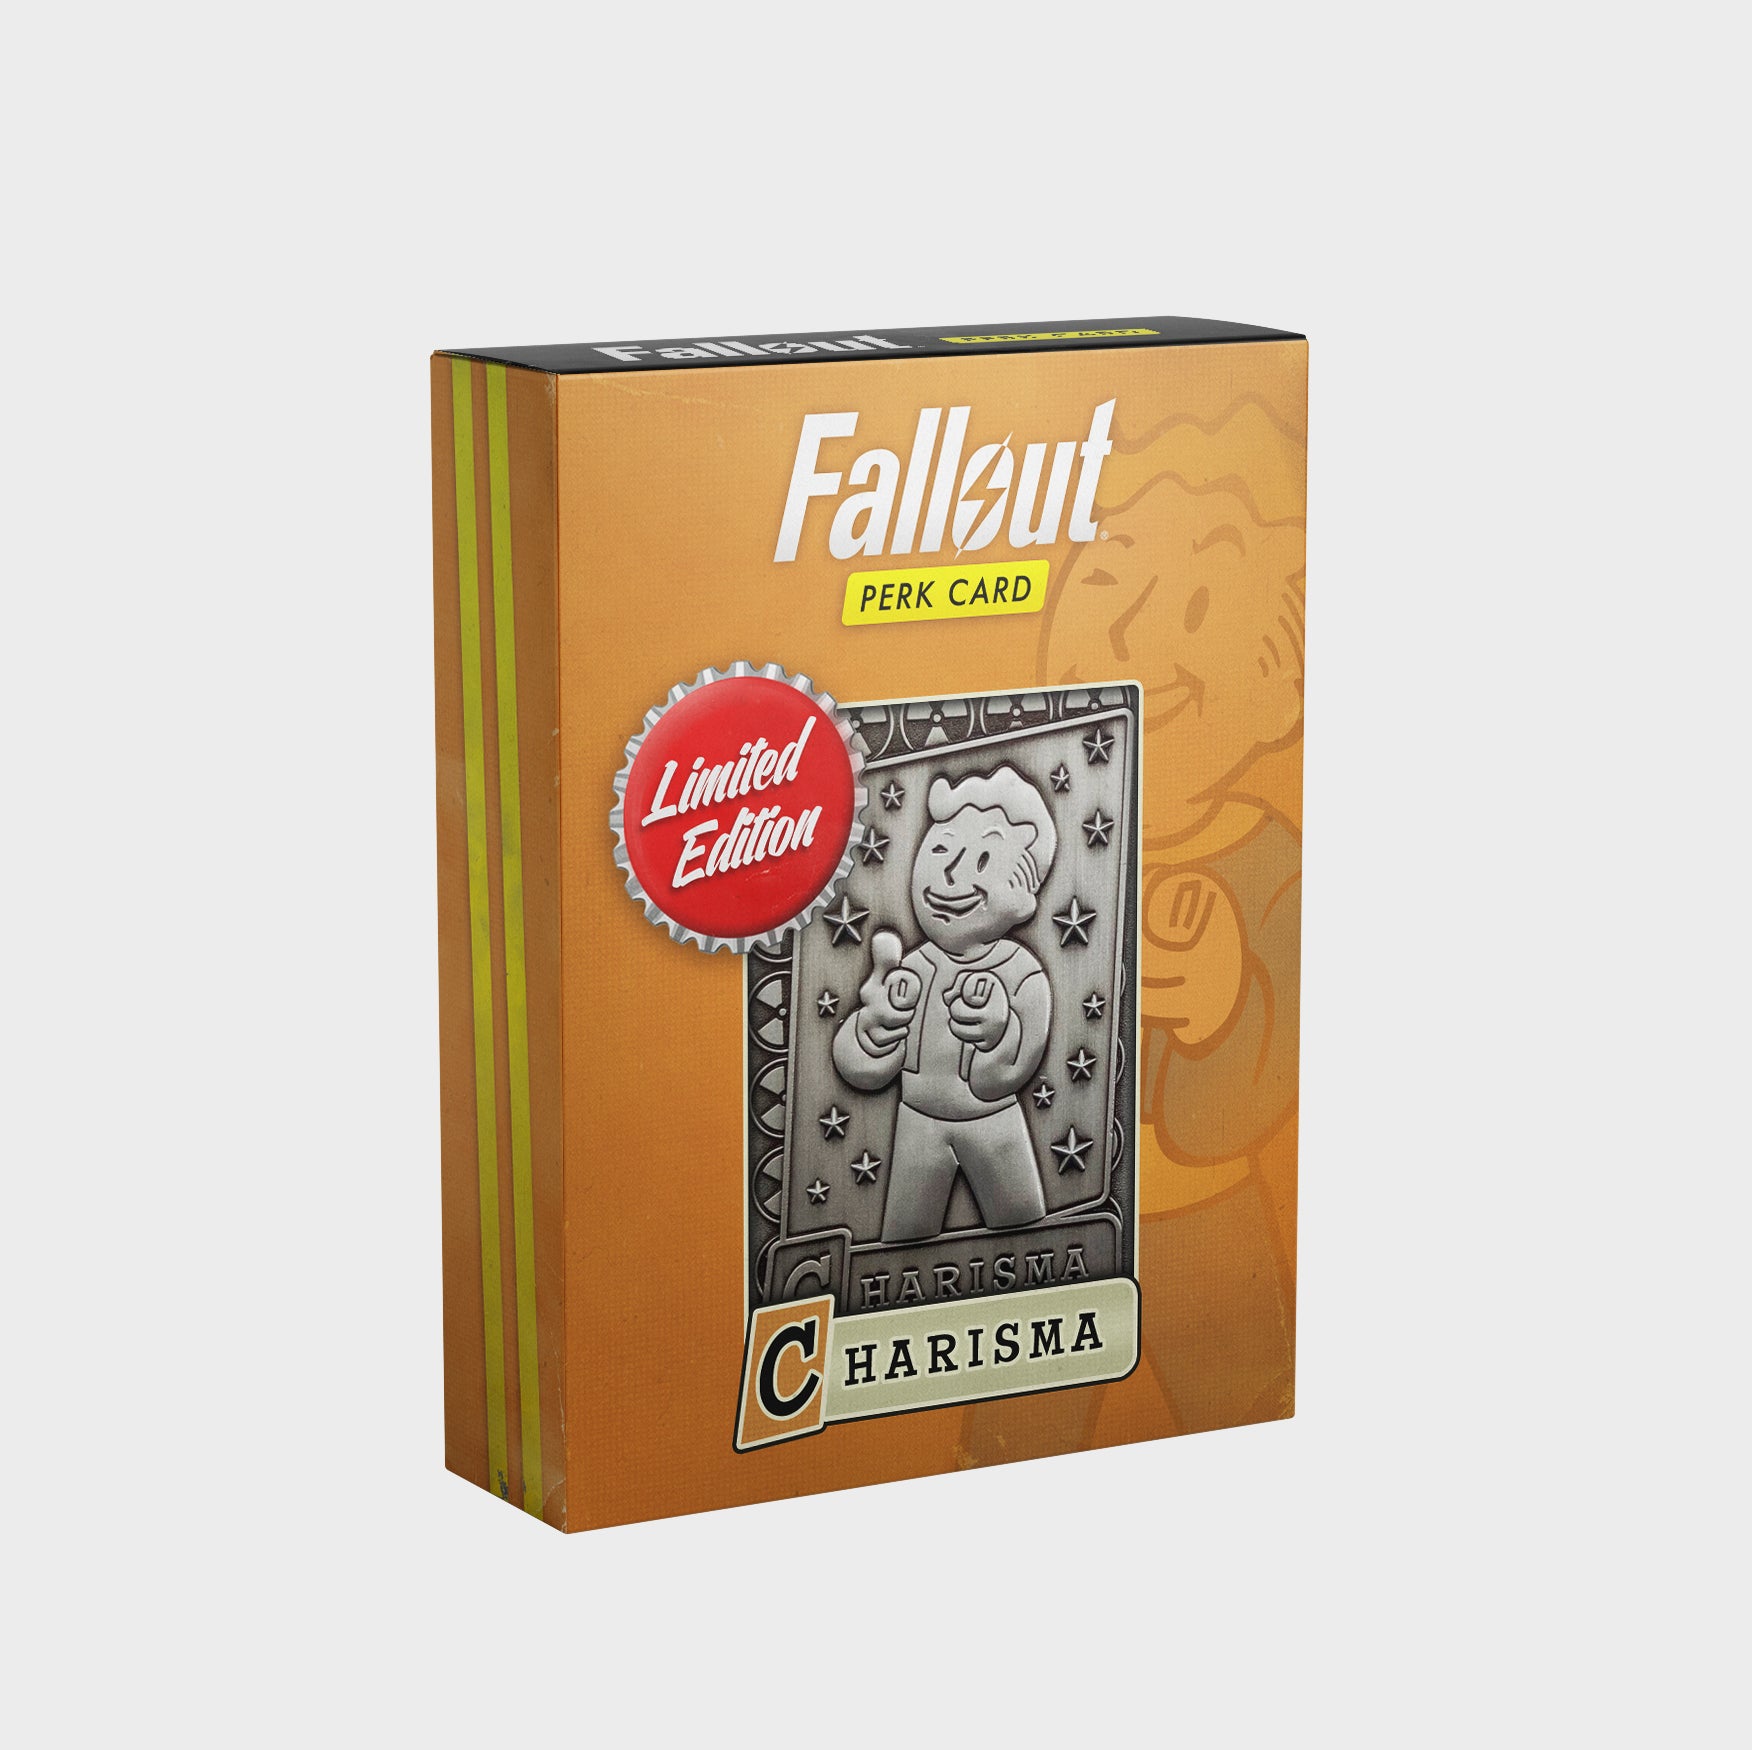 Fallout Charisma Perk Card Limited Edition